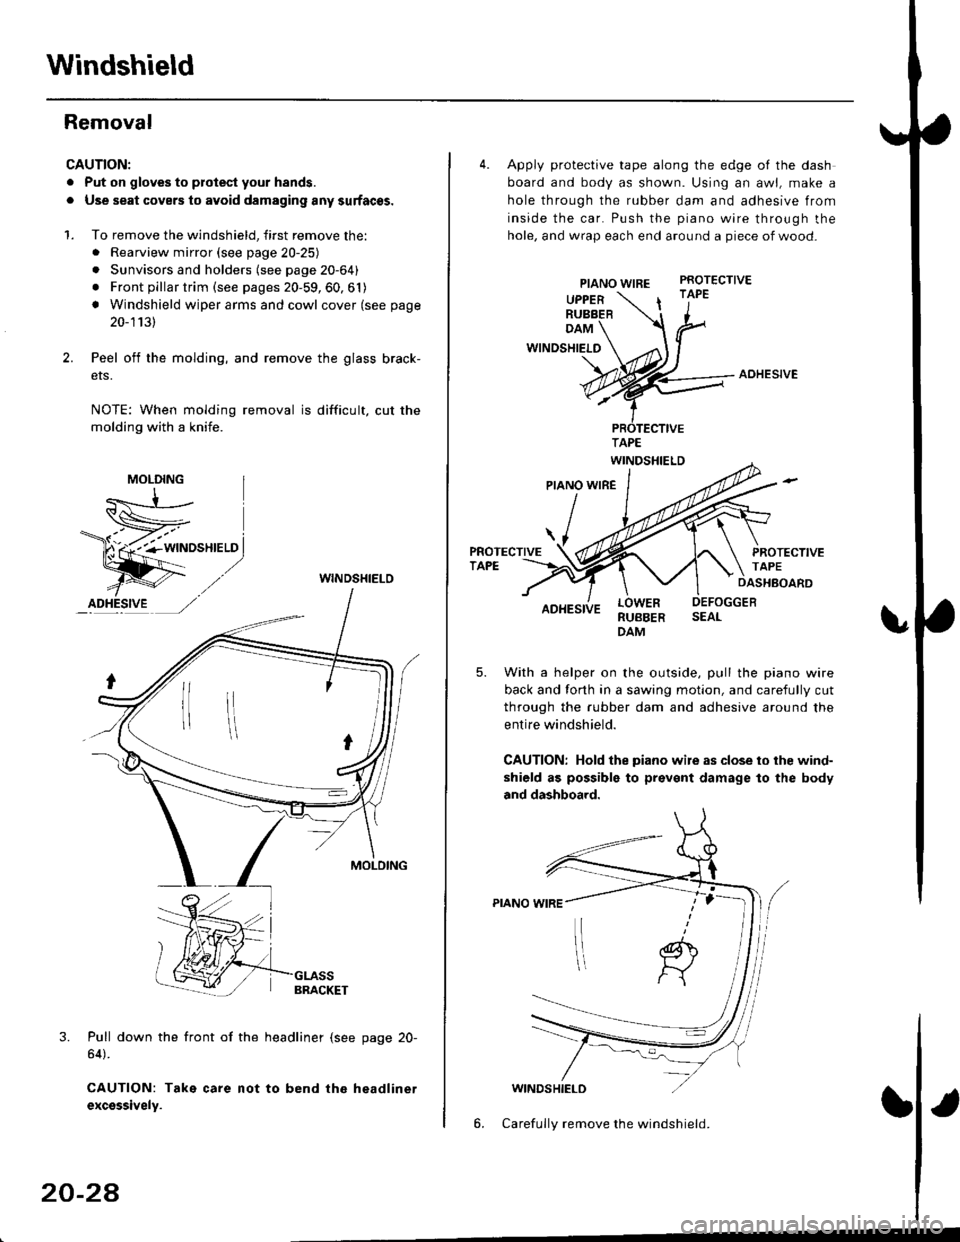 HONDA CIVIC 1998 6.G Workshop Manual Windshield
Removal
CAUTION:
. Put on gloves to plotest your h8nds.
. Use seat covers to avoid damaging any surfaces.
1. To remove the windshield, first remove the:. Rearview mirror (see page 20-25)
. 